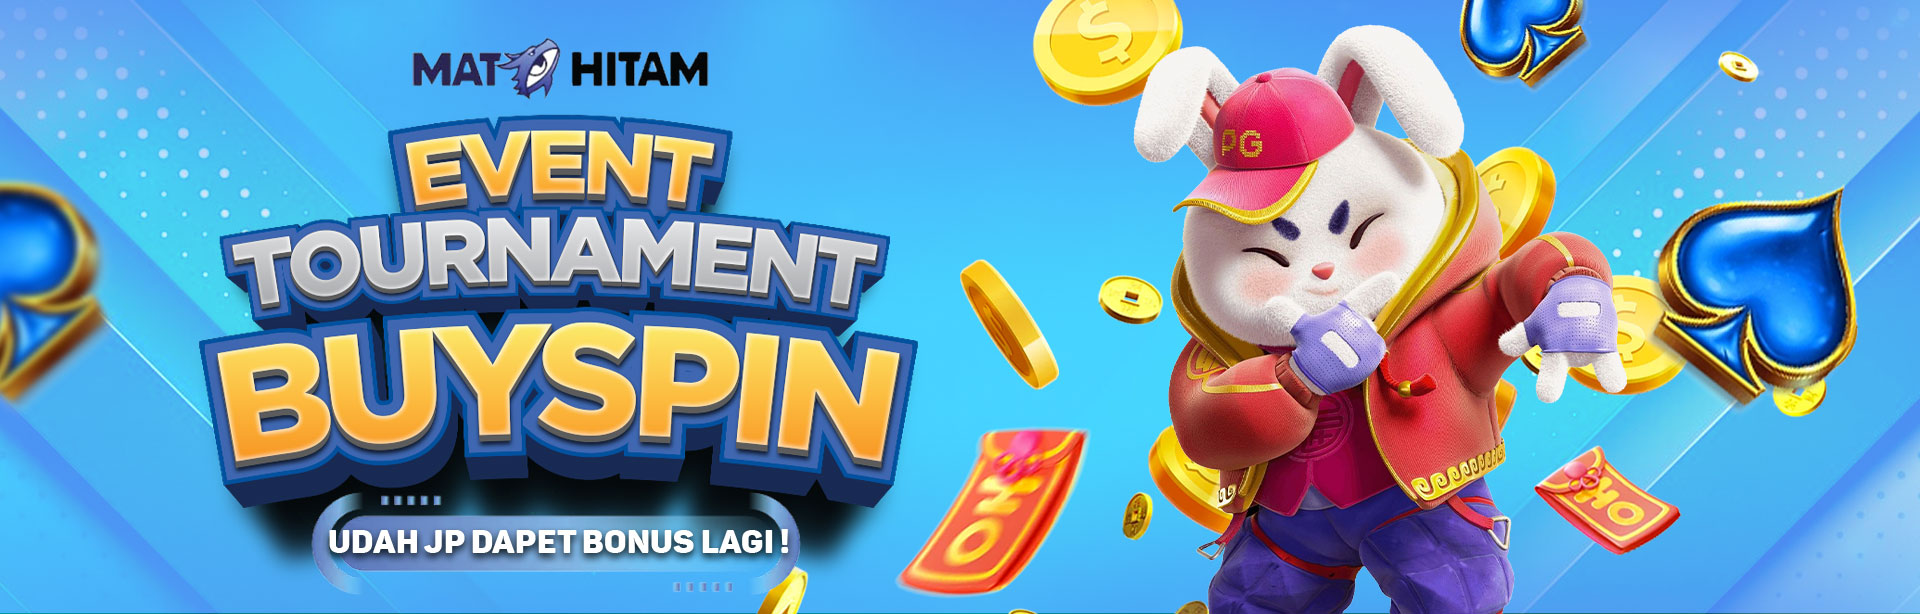 EVENT TOURNAMENT BUY SPIN 